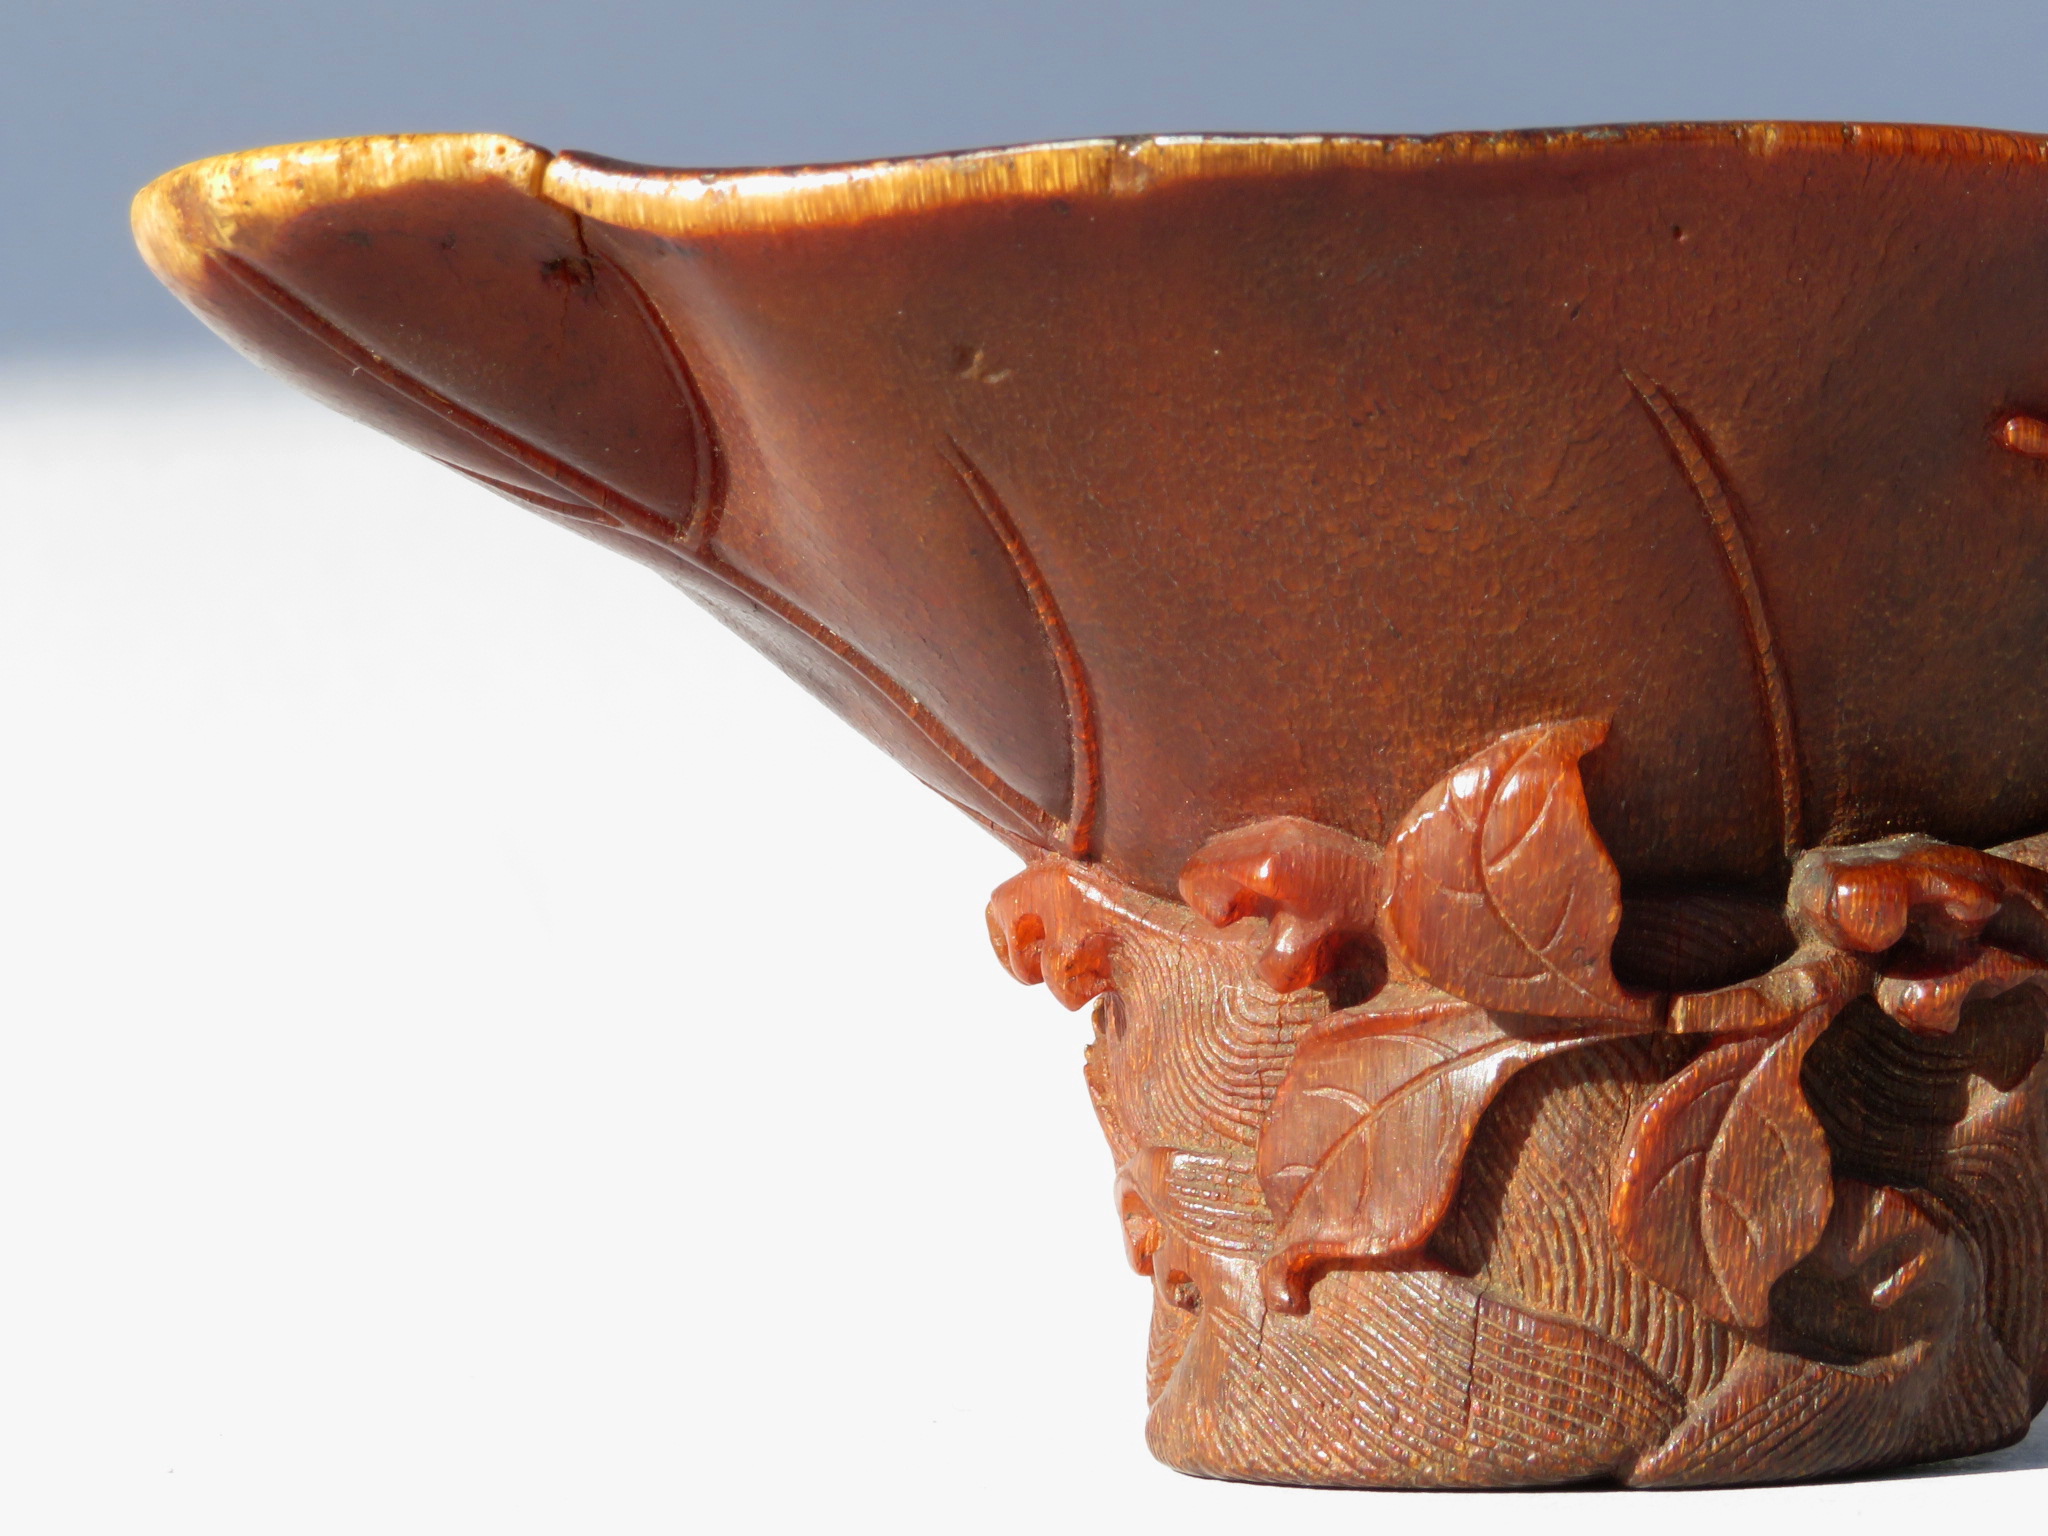 A RARE CHINESE RHINOCEROS HORN ‘CAMELLIA LEAF’ LIBATION CUP, QING DYNASTY, 17TH CENTURY - Image 20 of 30